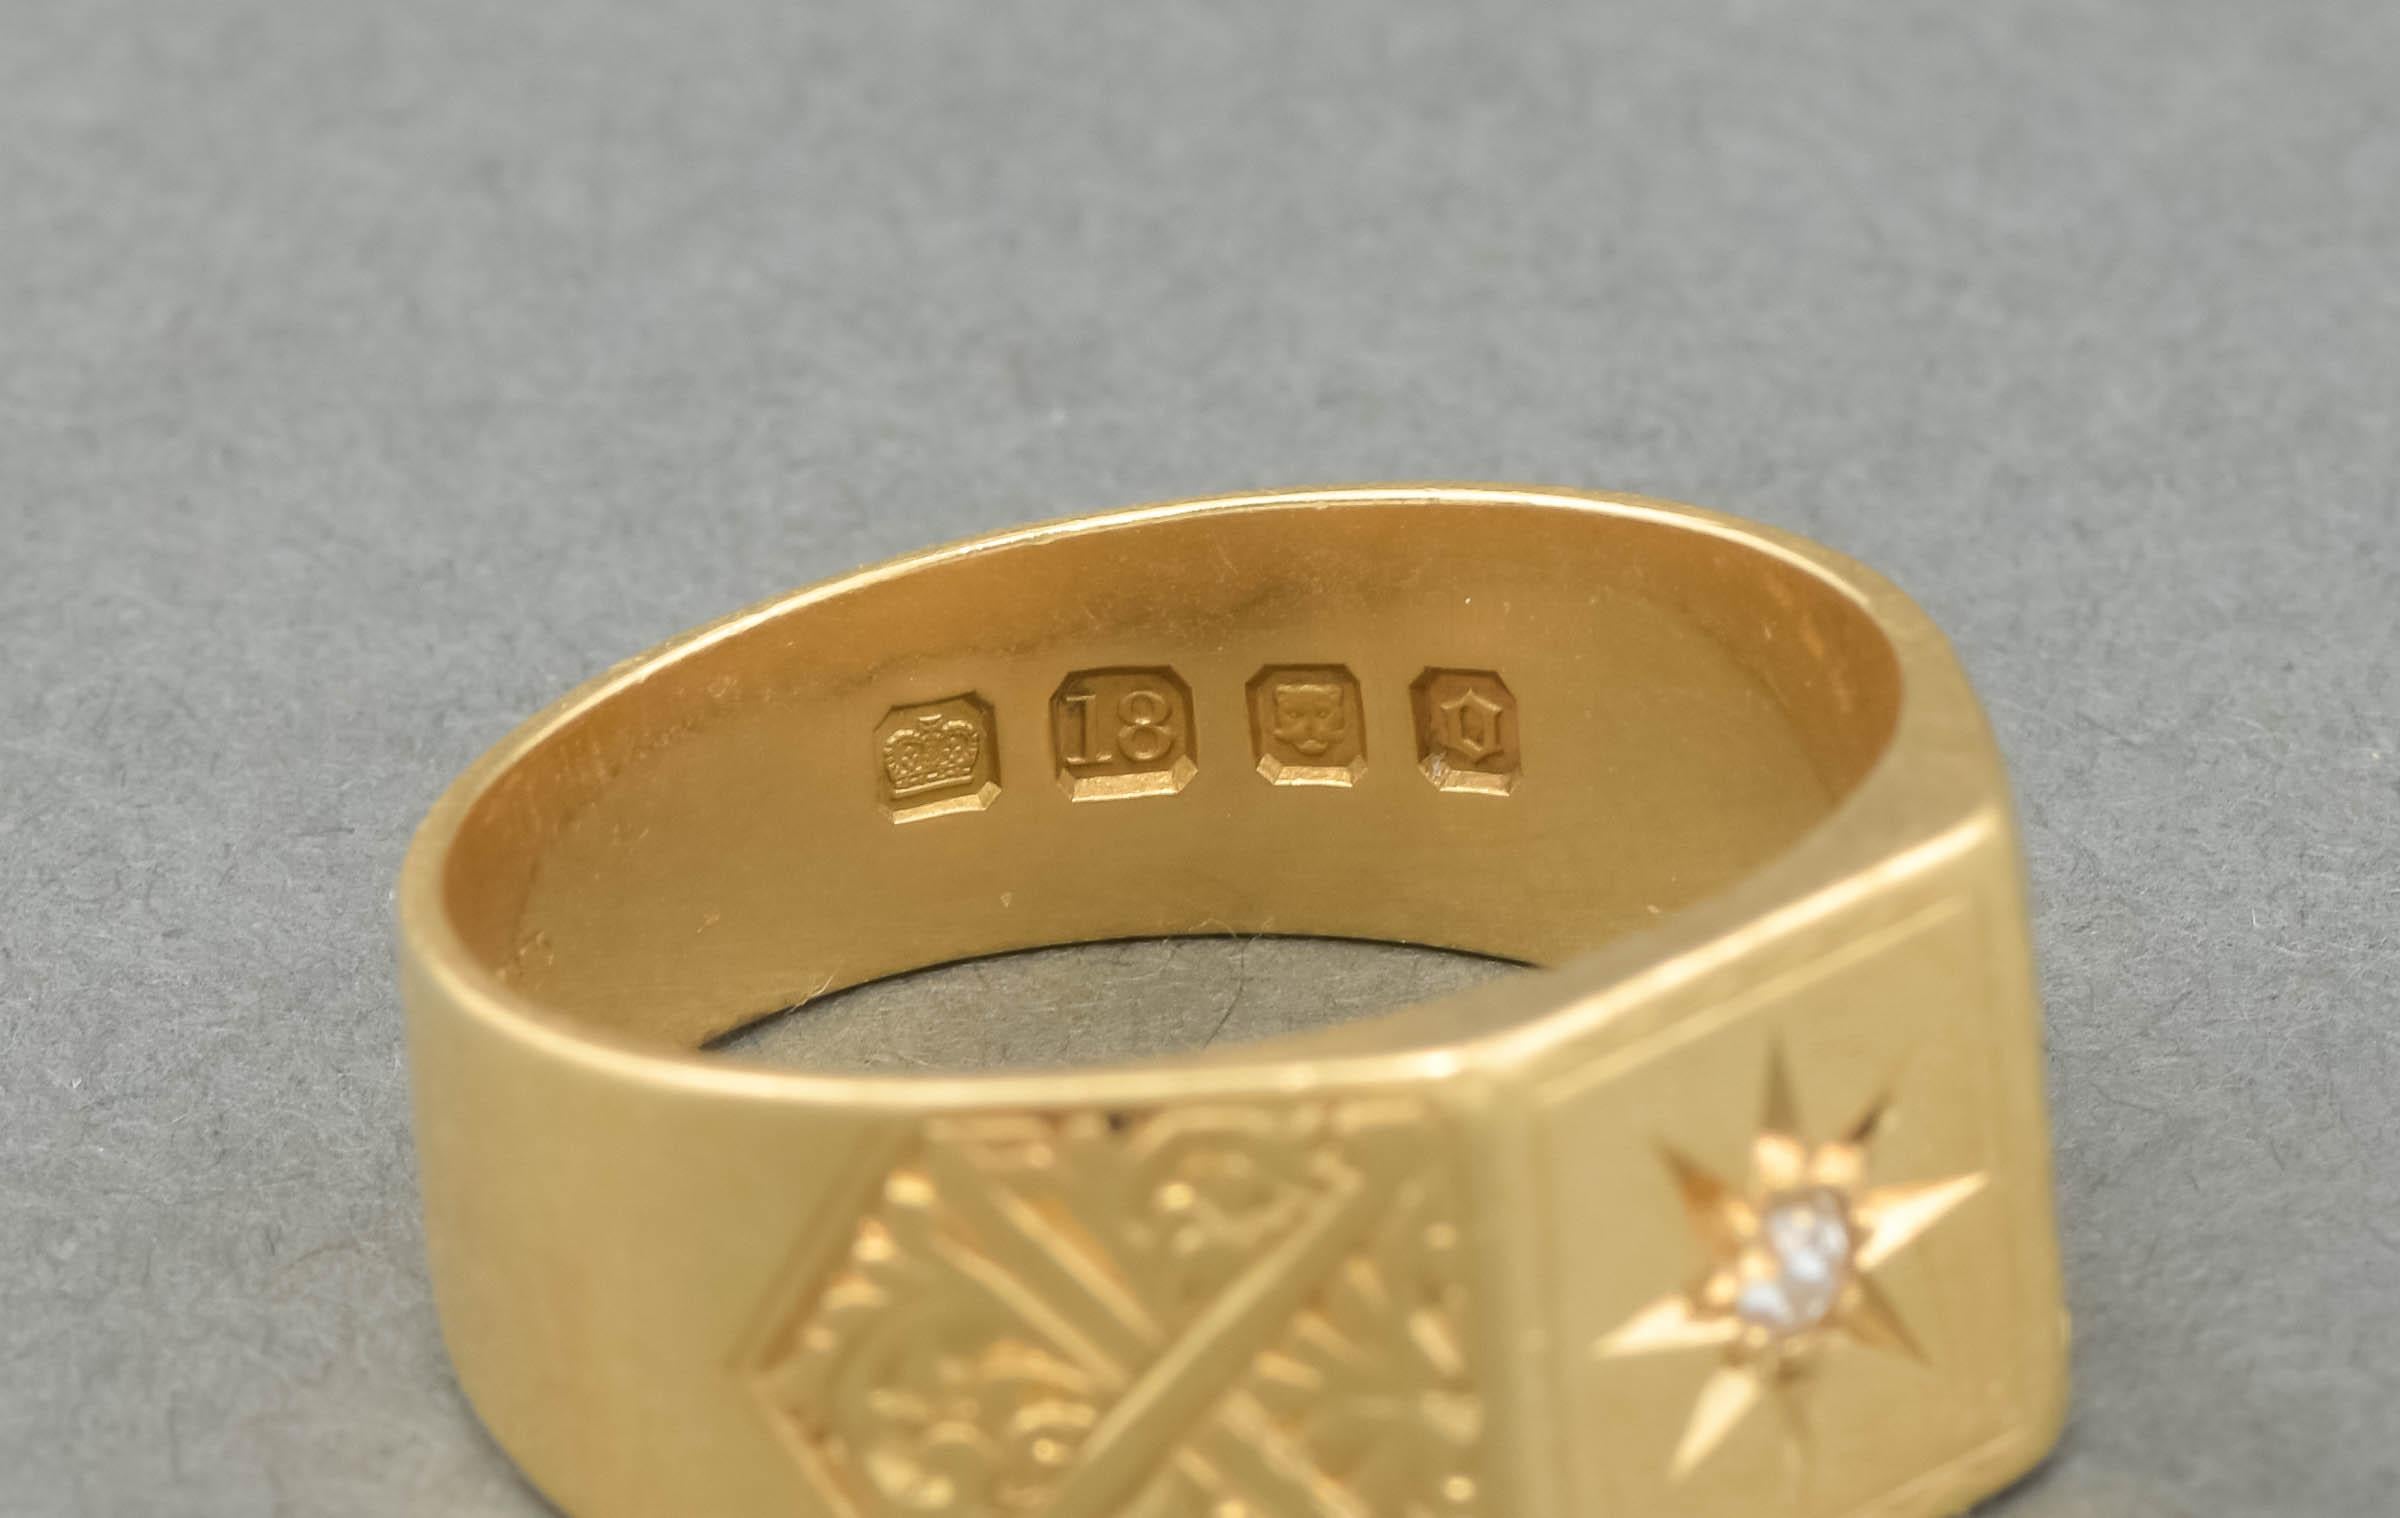 18K Gold Diamond Star Signet Ring with Engraved Shoulders, hallmarked 1929 5